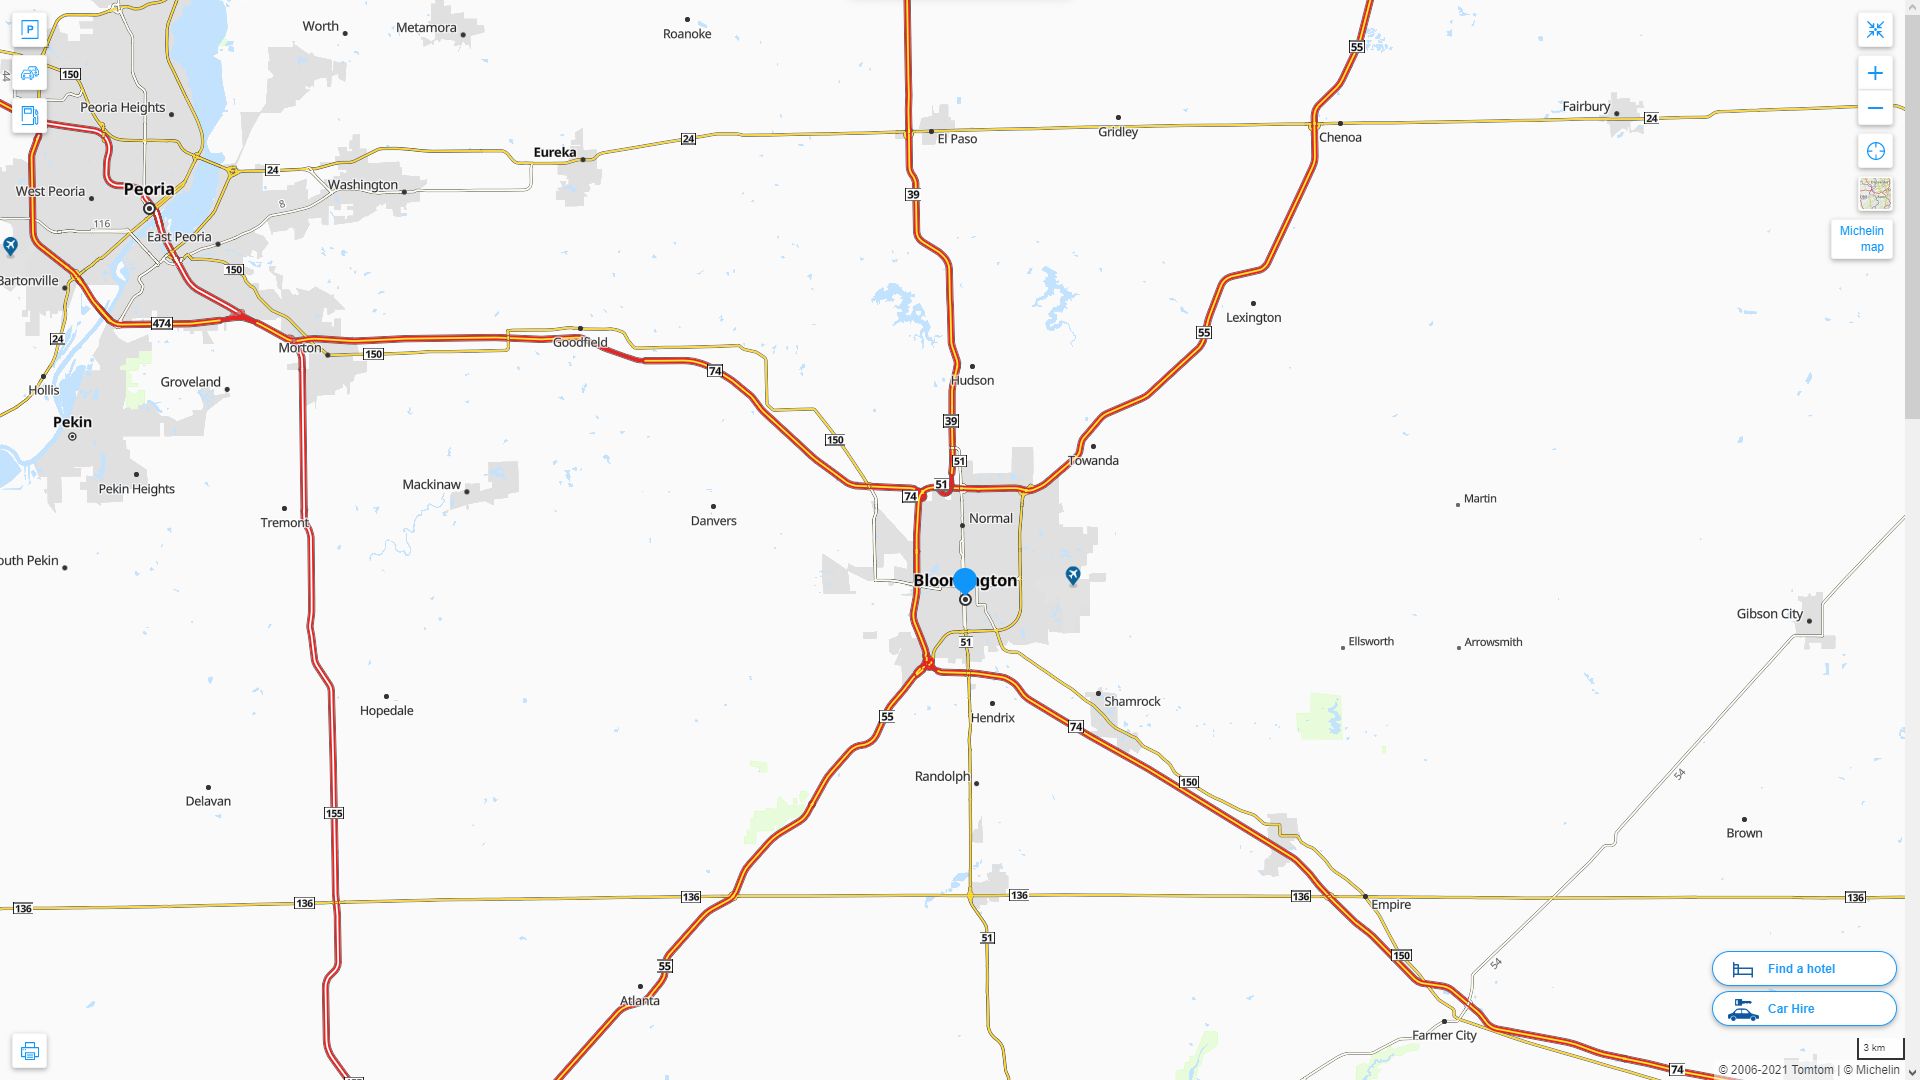 Bloomington illinois Highway and Road Map